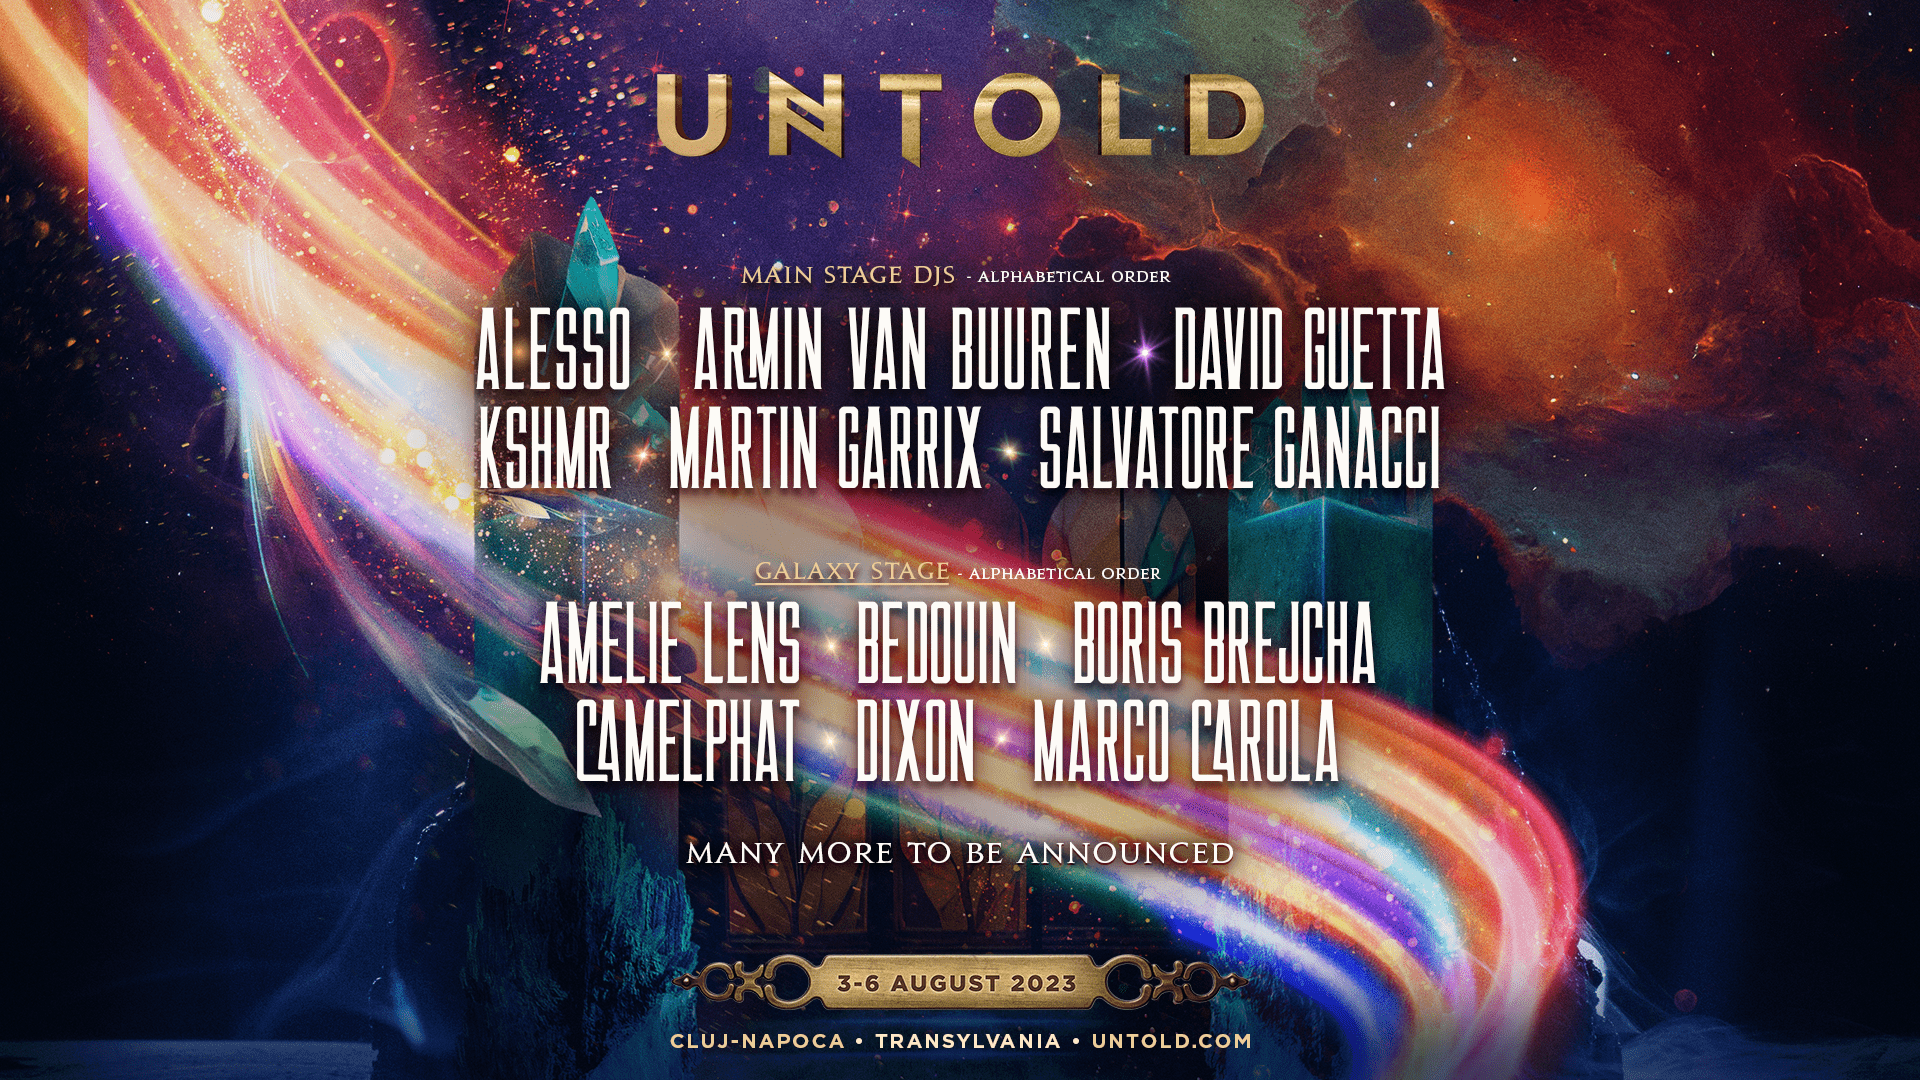 UNTOLD Festival announces next phase of 2023 line up featuring David